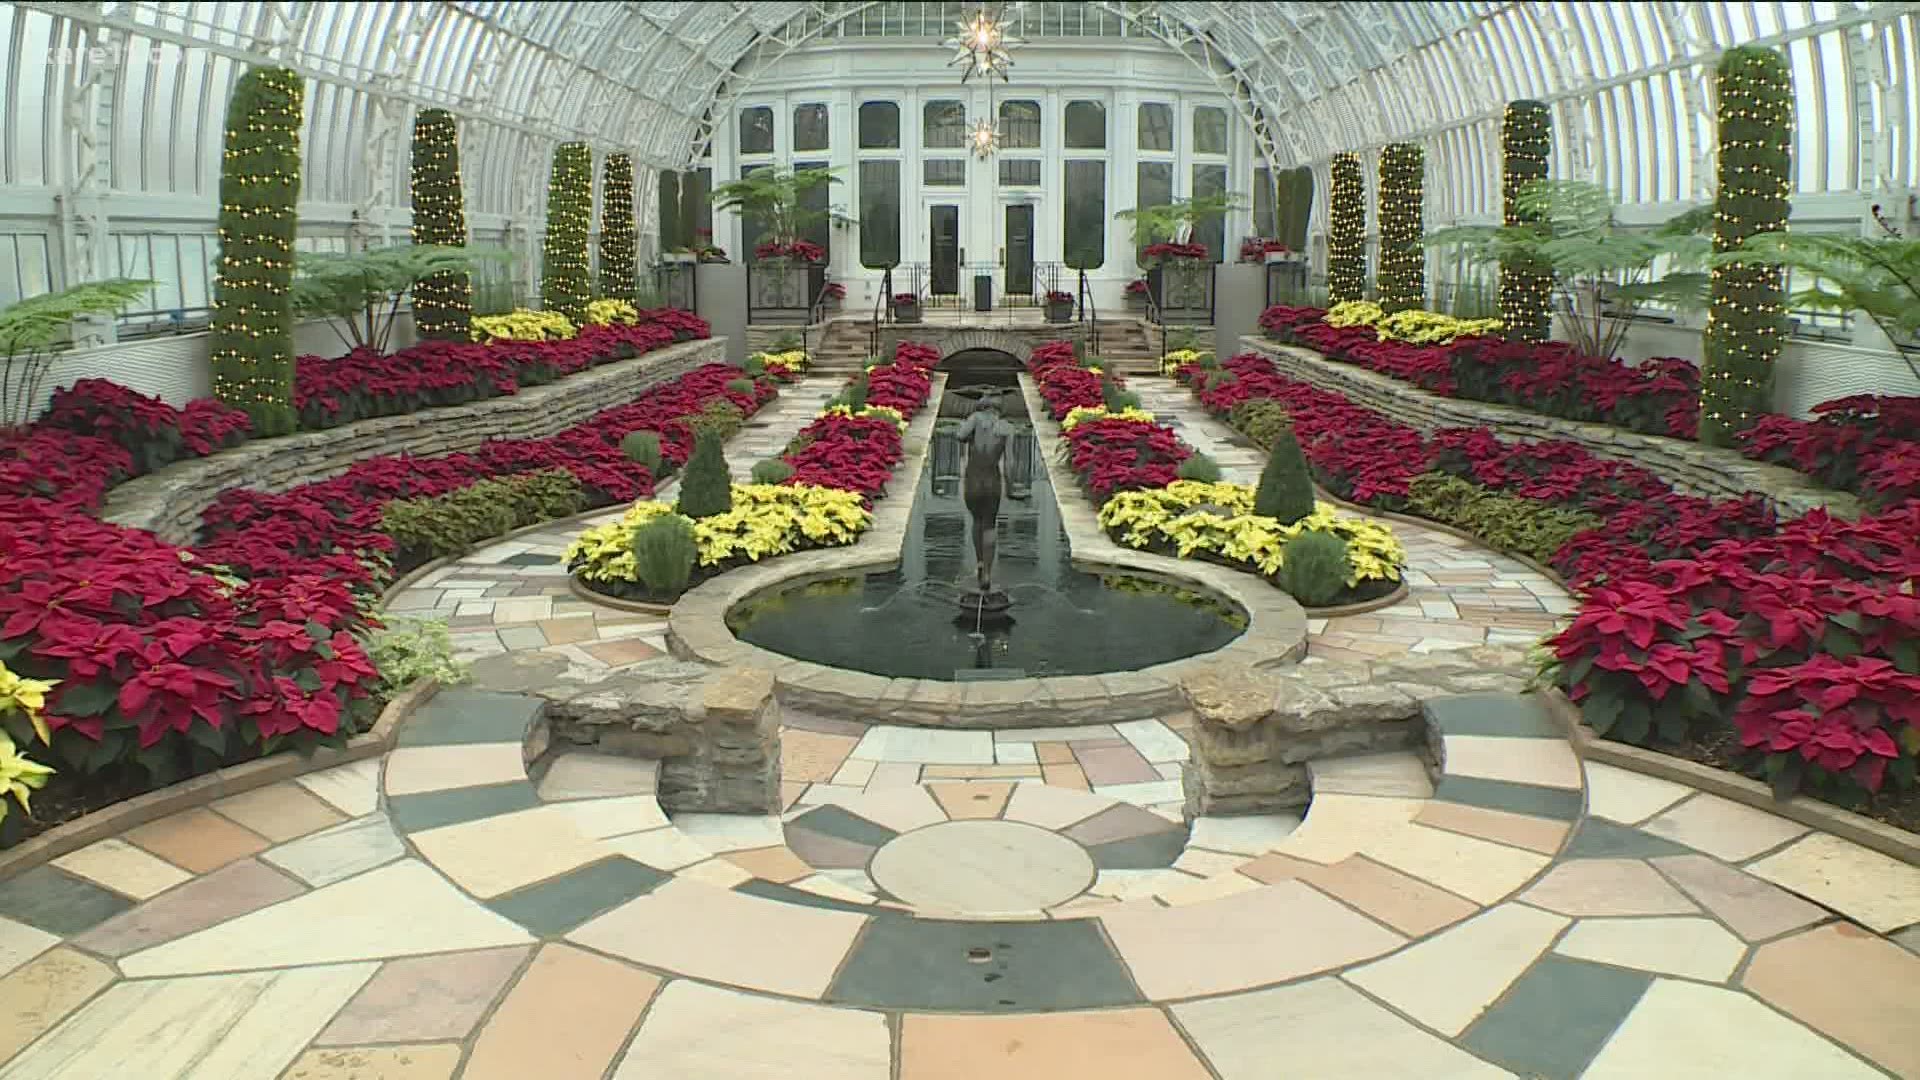 Como Park Zoo and Conservatory Holiday Flower Show